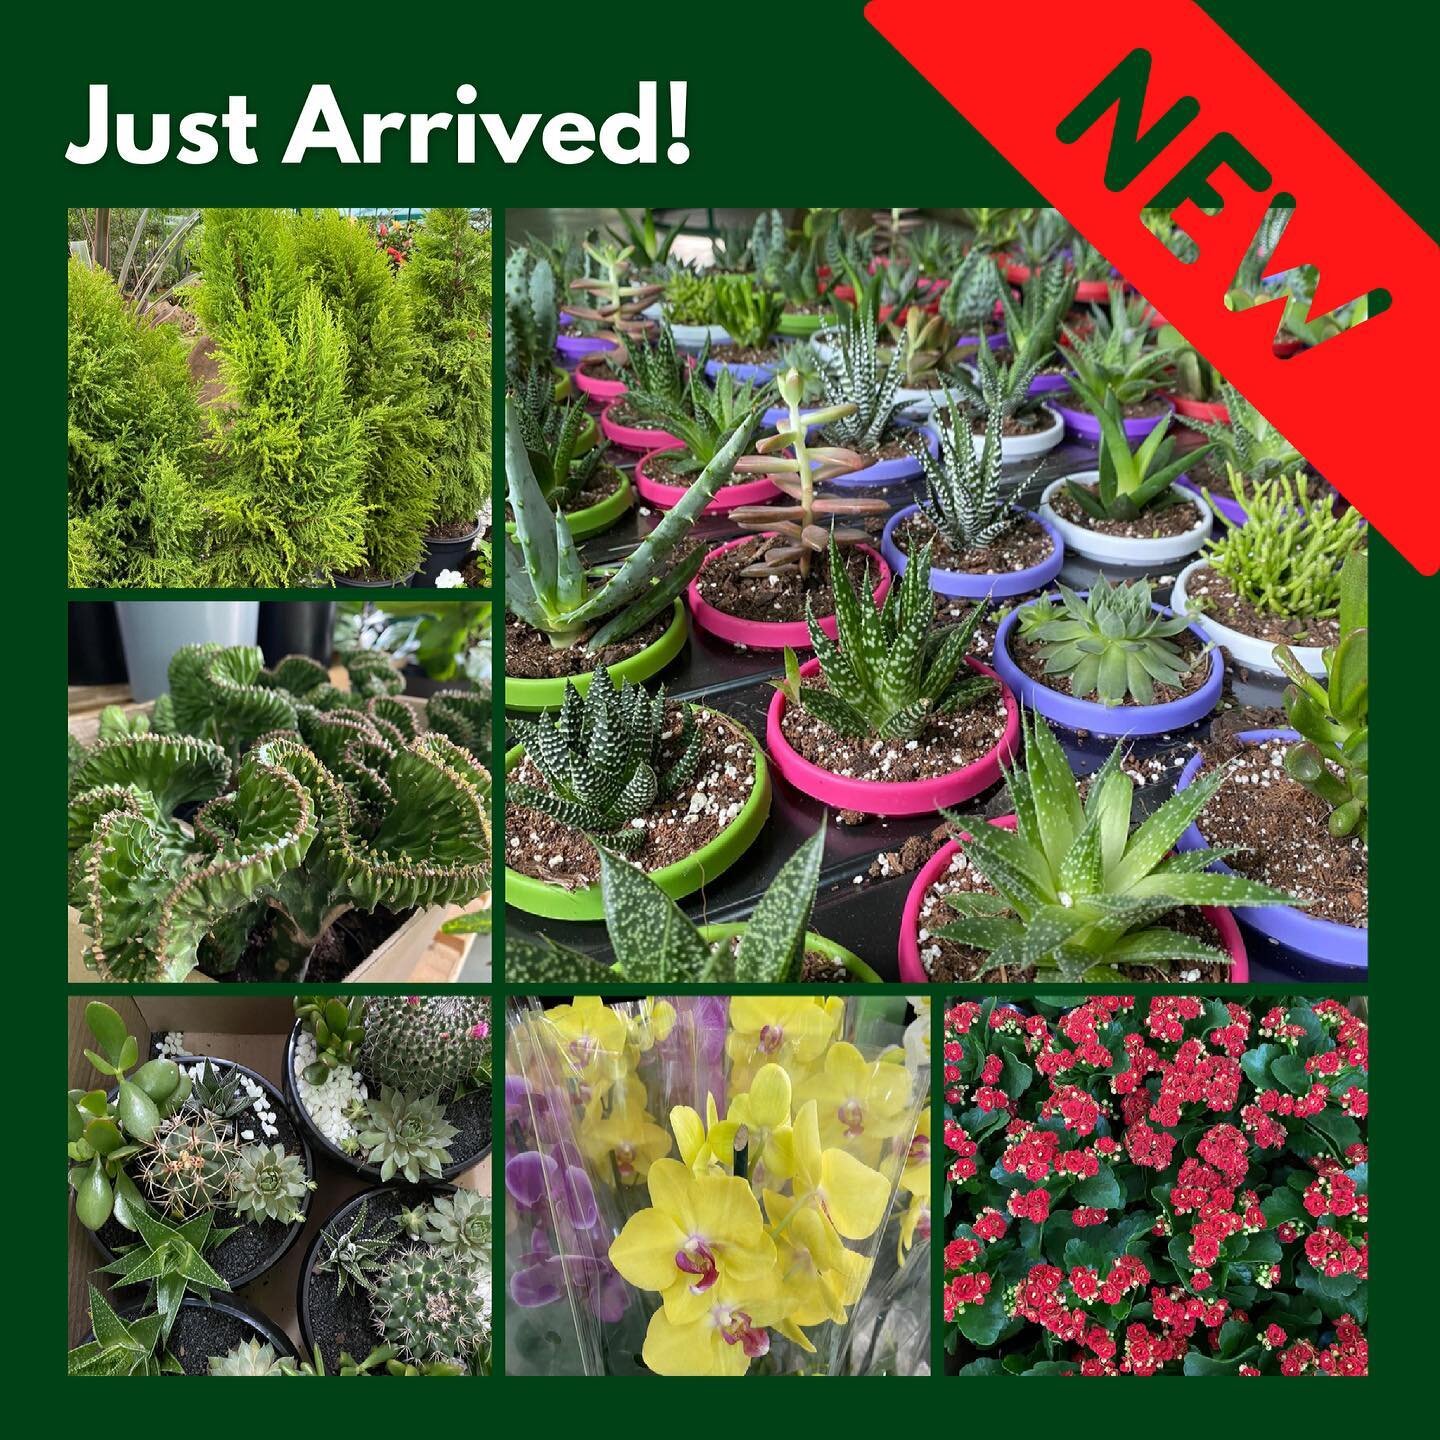 ‼️NEW‼️ have you ever seen such gorgeous plants? Cacti, rare and unique succulents, orchids, colourful flowers, litchi and citrus fruit trees and more! Call / WhatsApp us on +260 96 4916259 for prices or more info now!